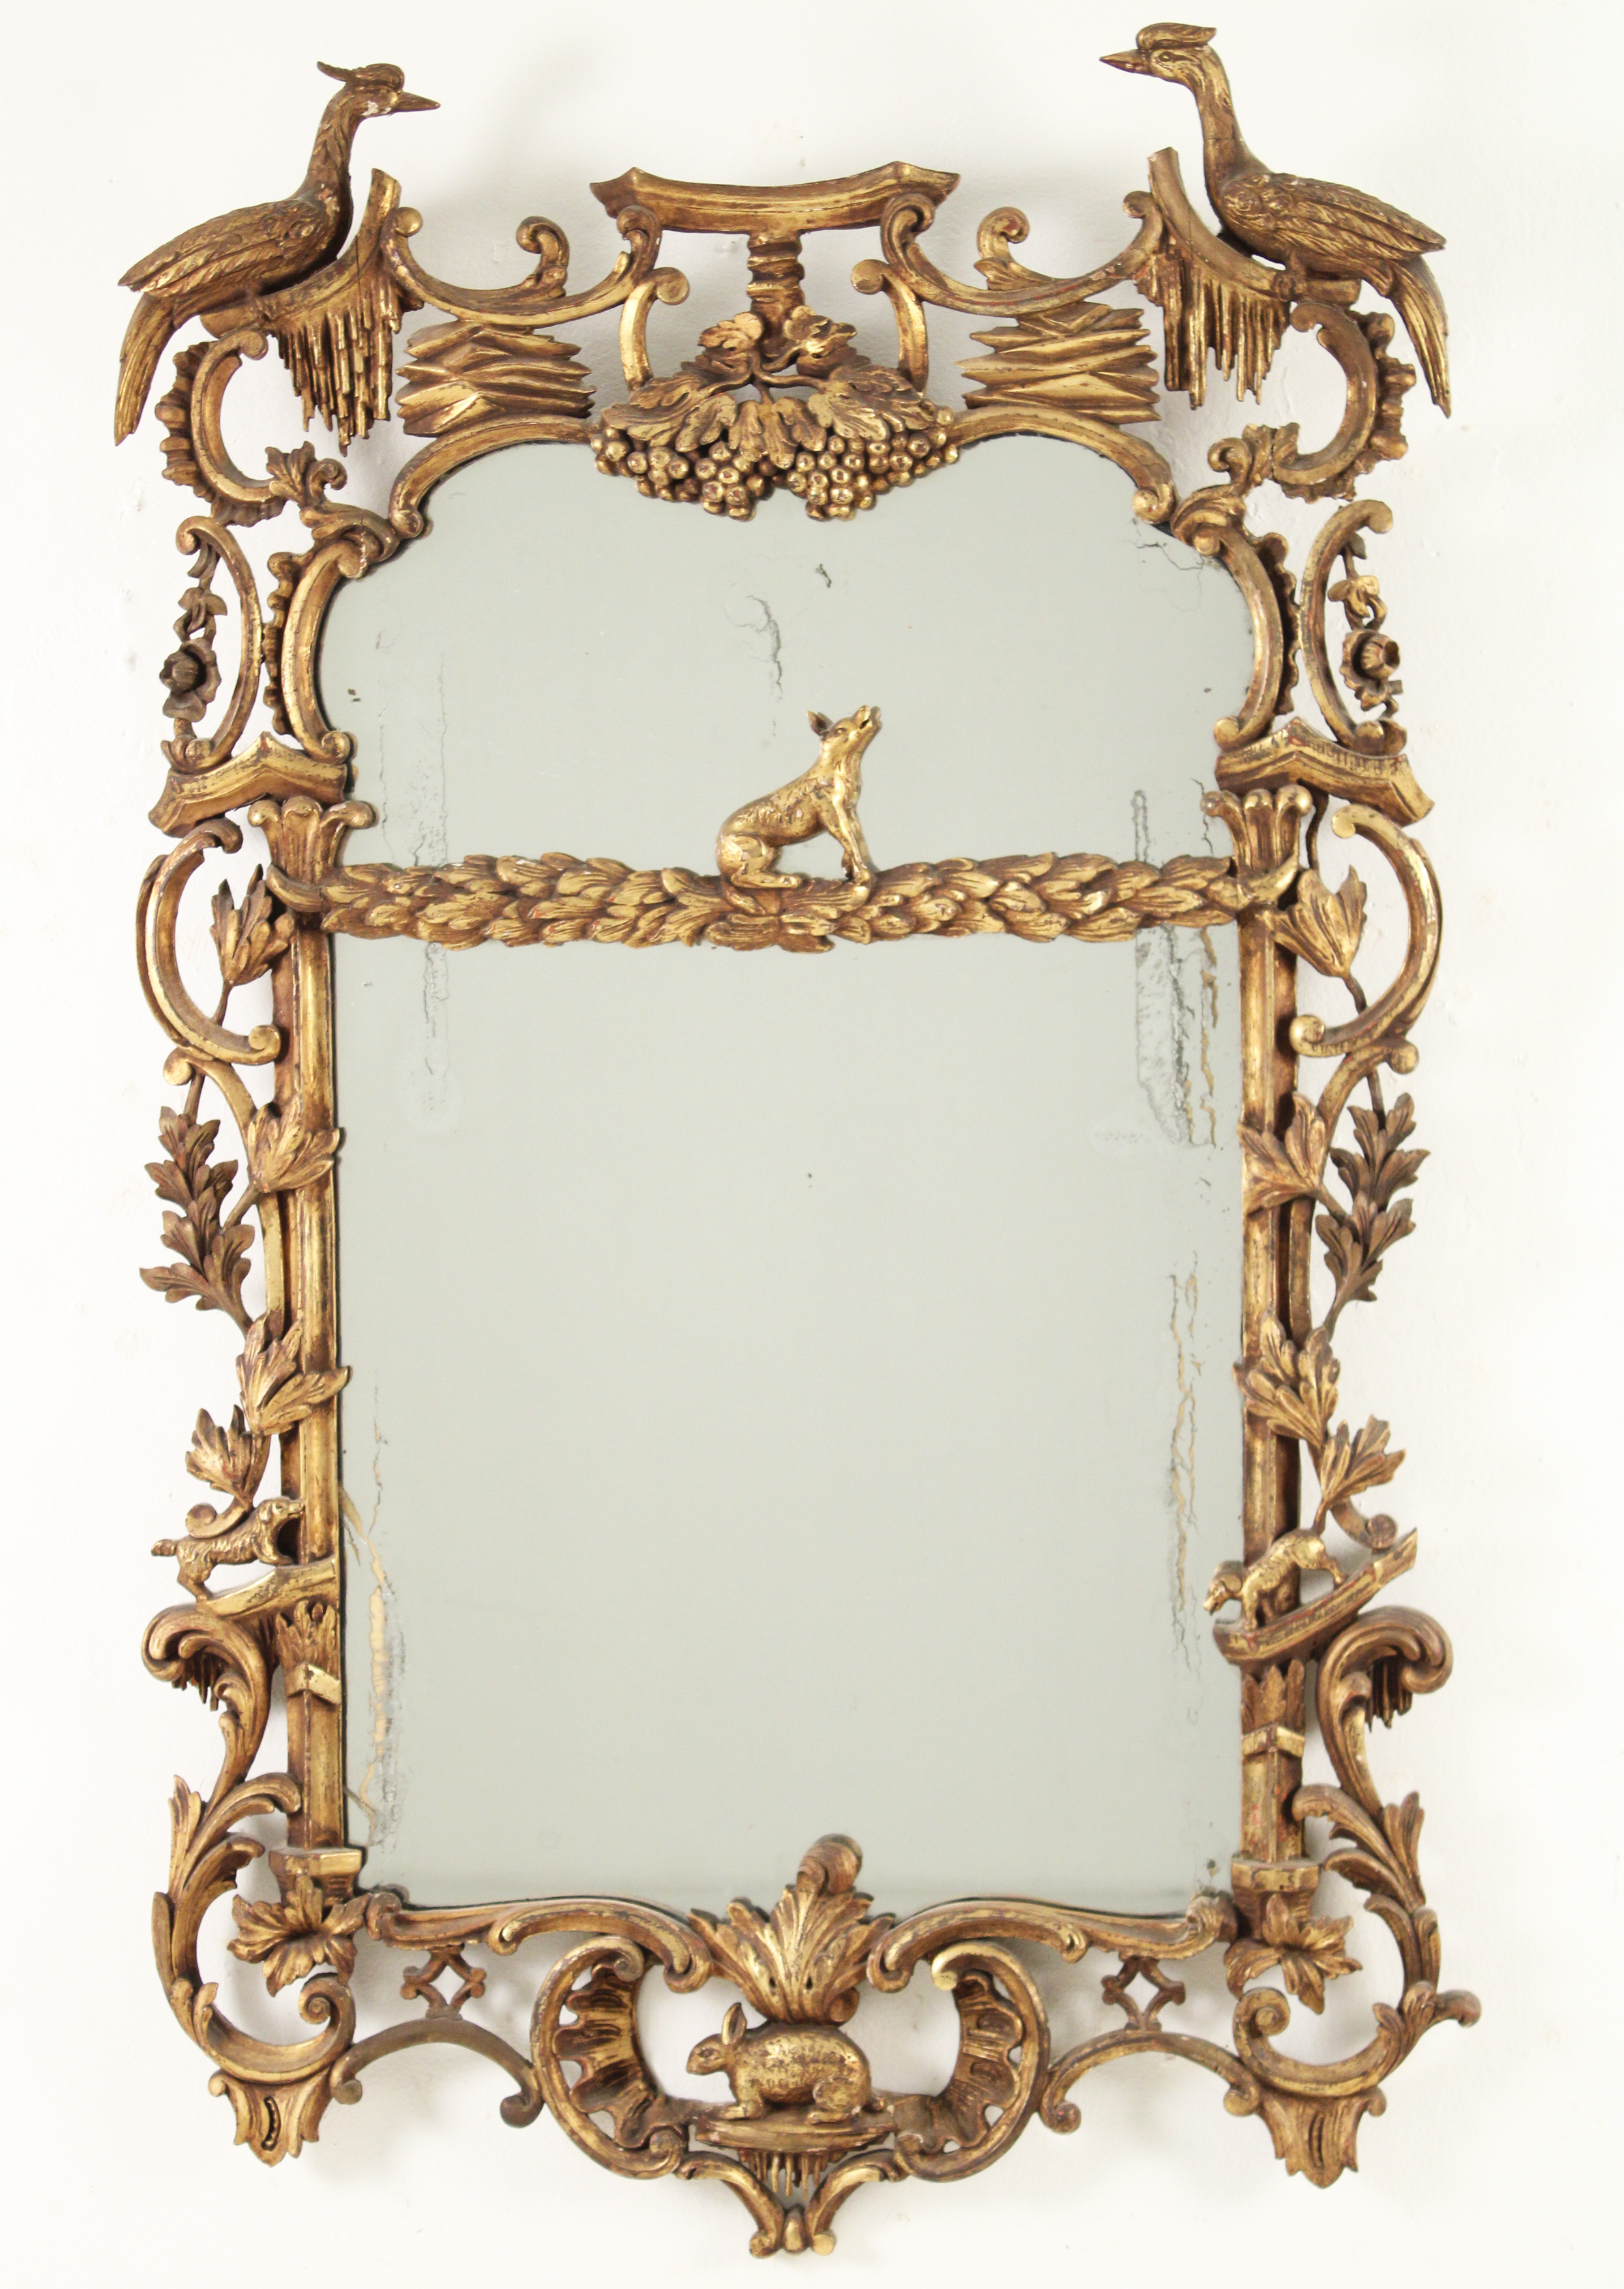 CHINESE CHIPPENDALE MIRROR, EARLY